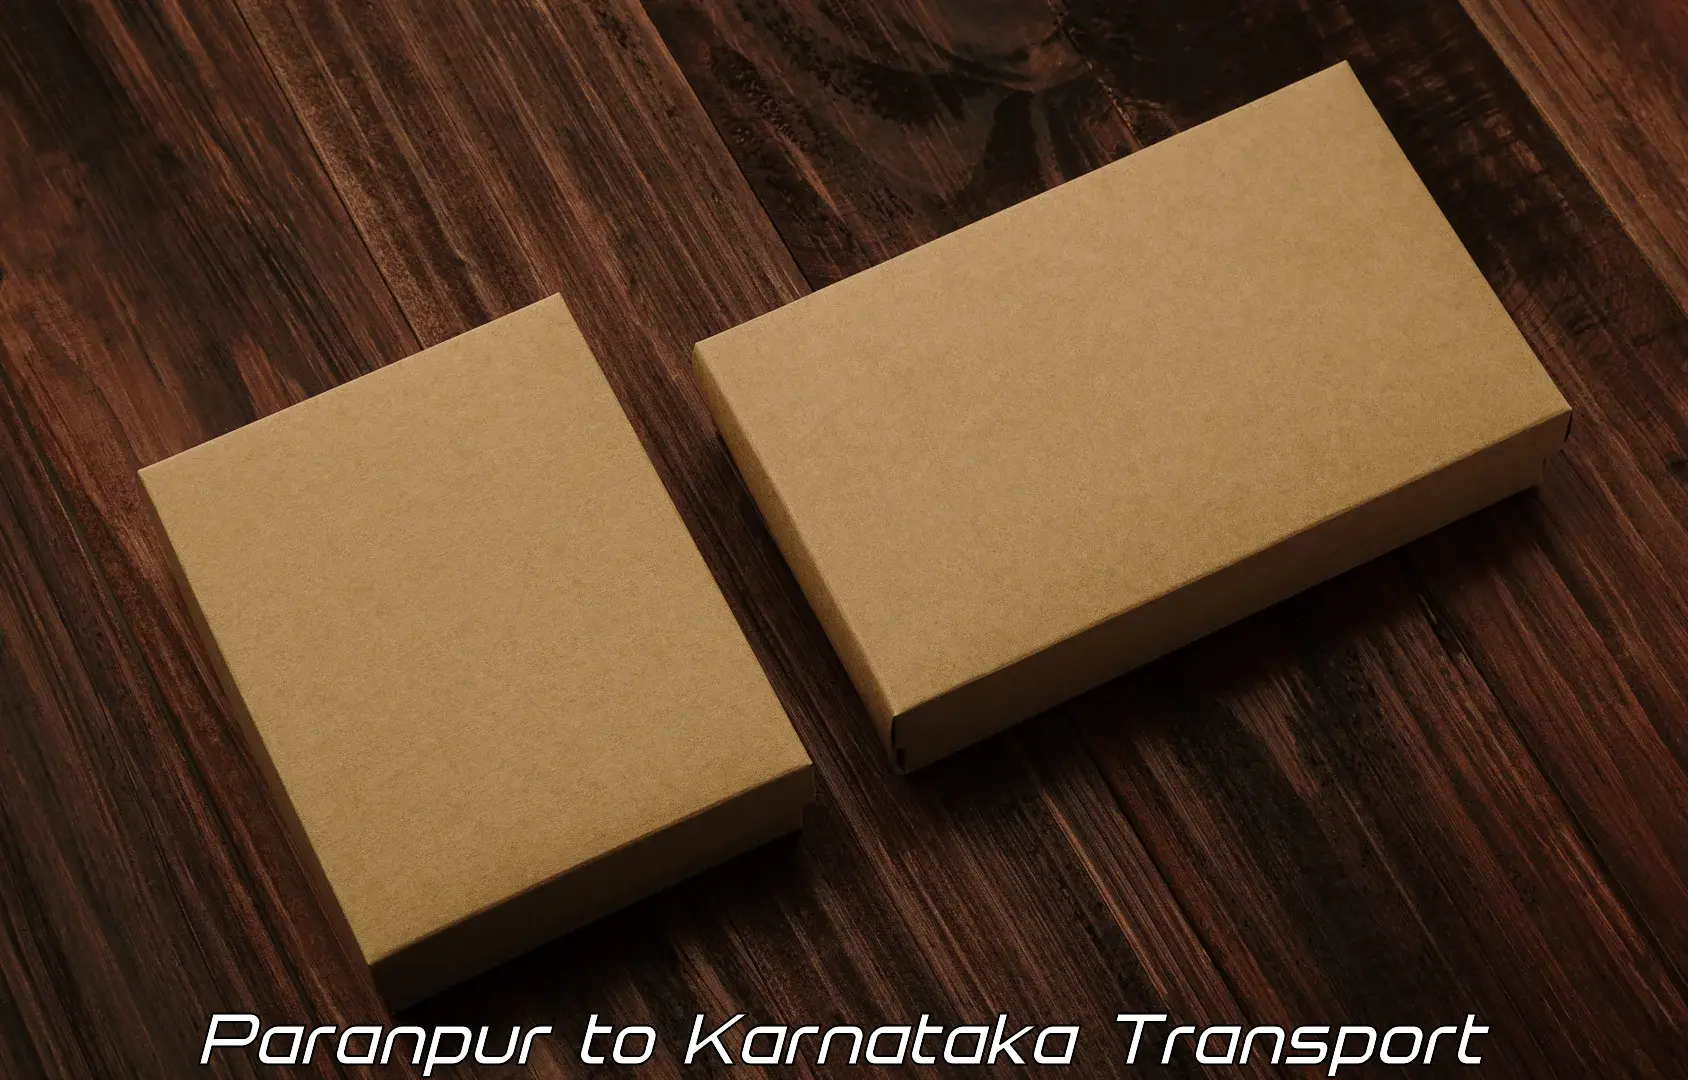 Transport shared services Paranpur to Yellapur